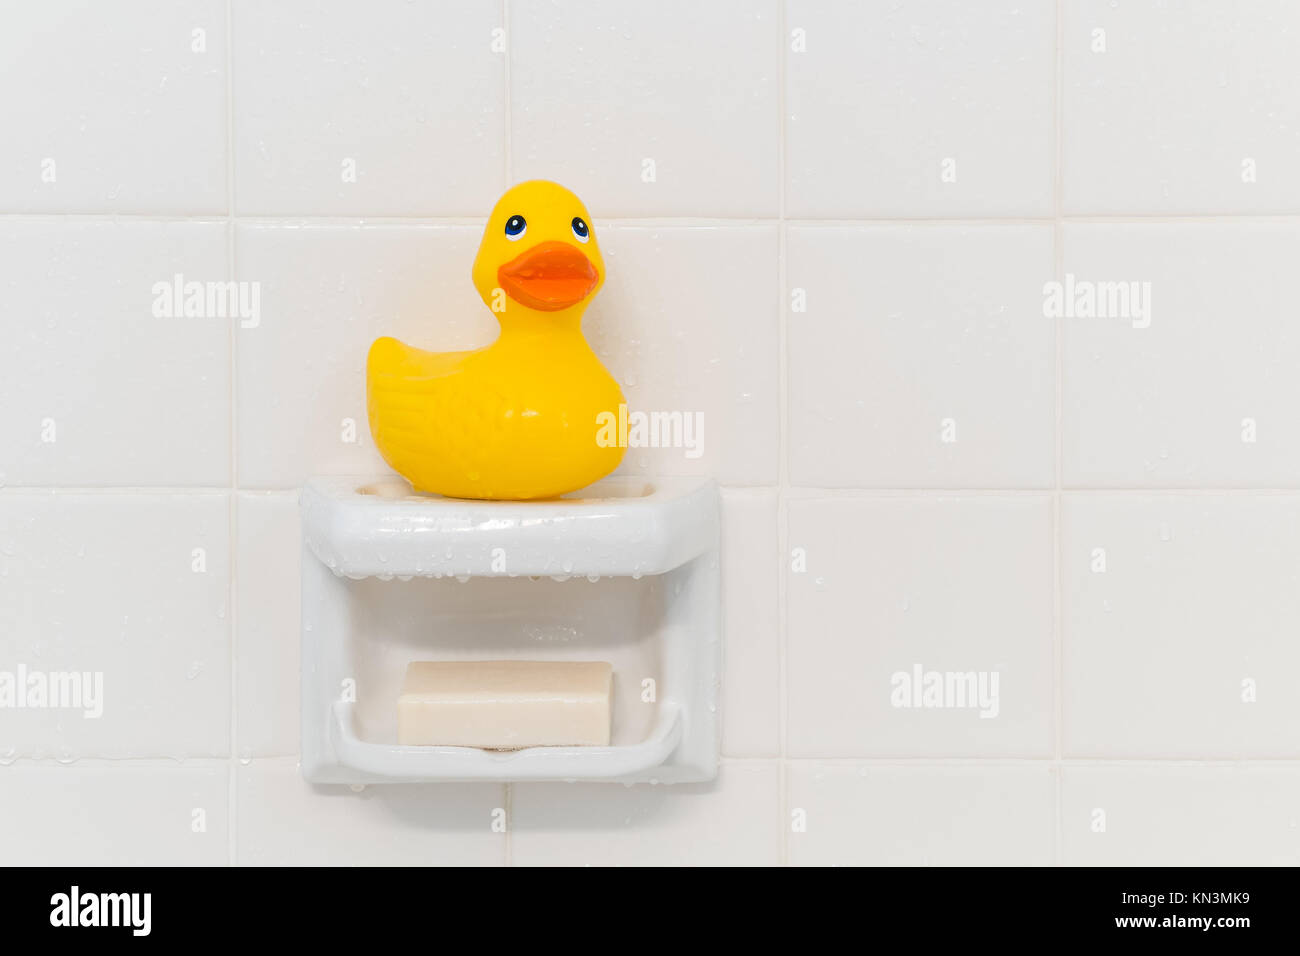 https://c8.alamy.com/comp/KN3MK9/yellow-rubber-duck-sitting-on-a-soap-dish-in-a-shower-KN3MK9.jpg